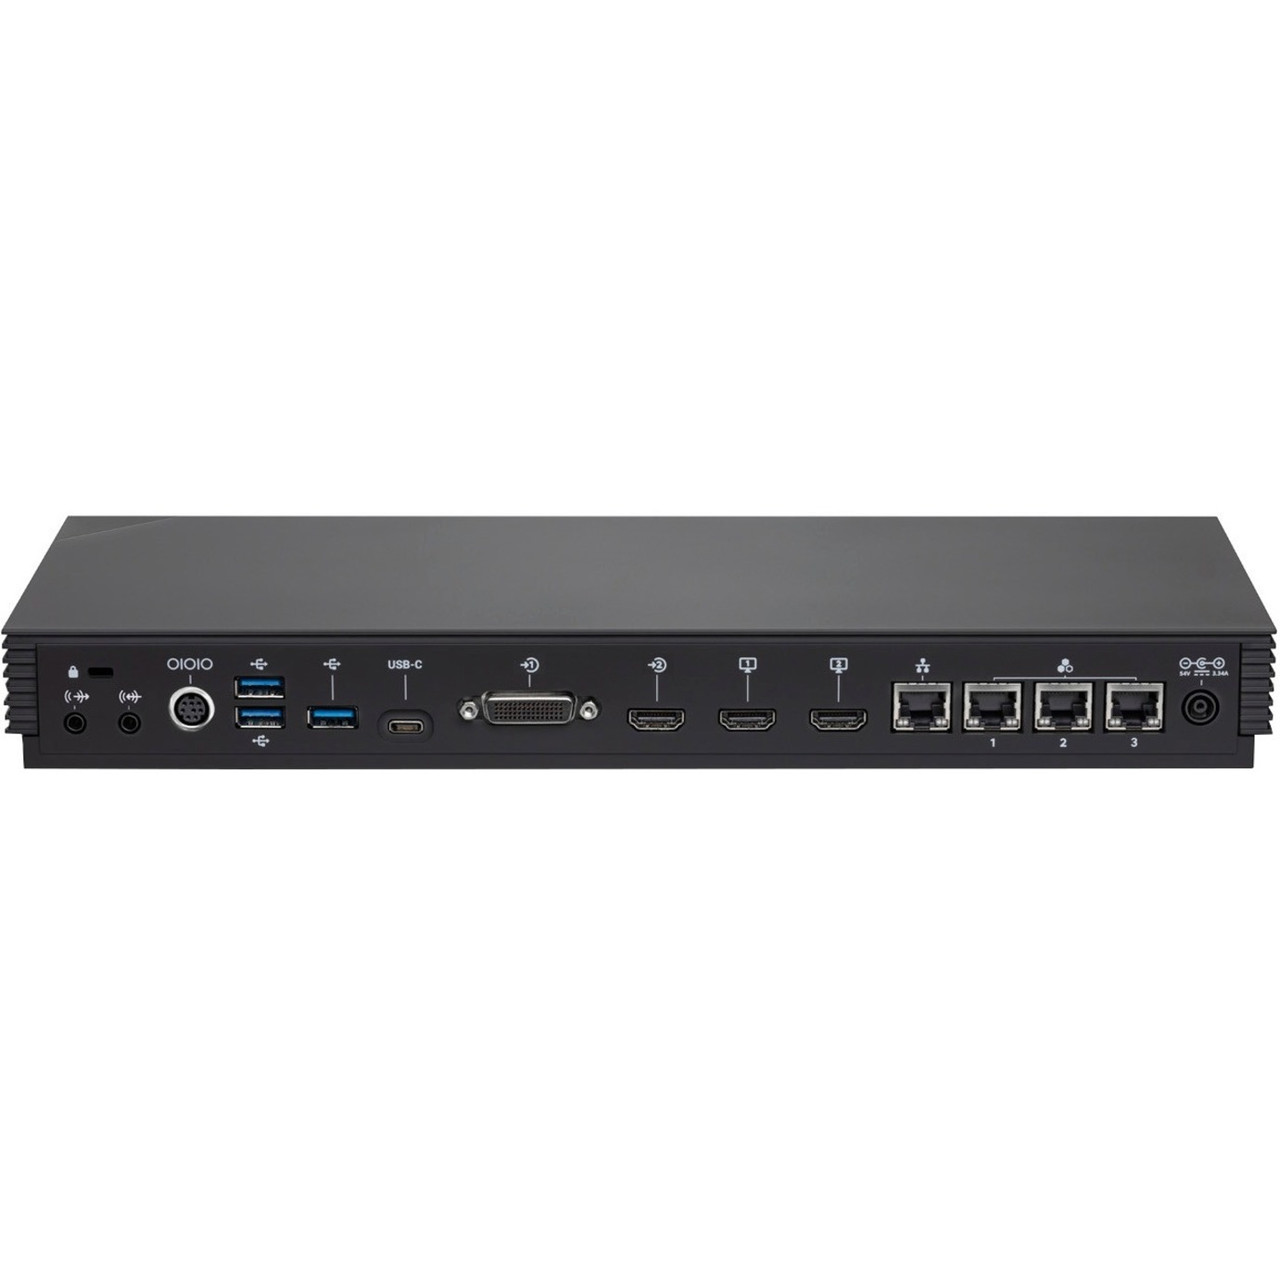 Poly G7500 Video Conference Equipment - 7230-87920-125